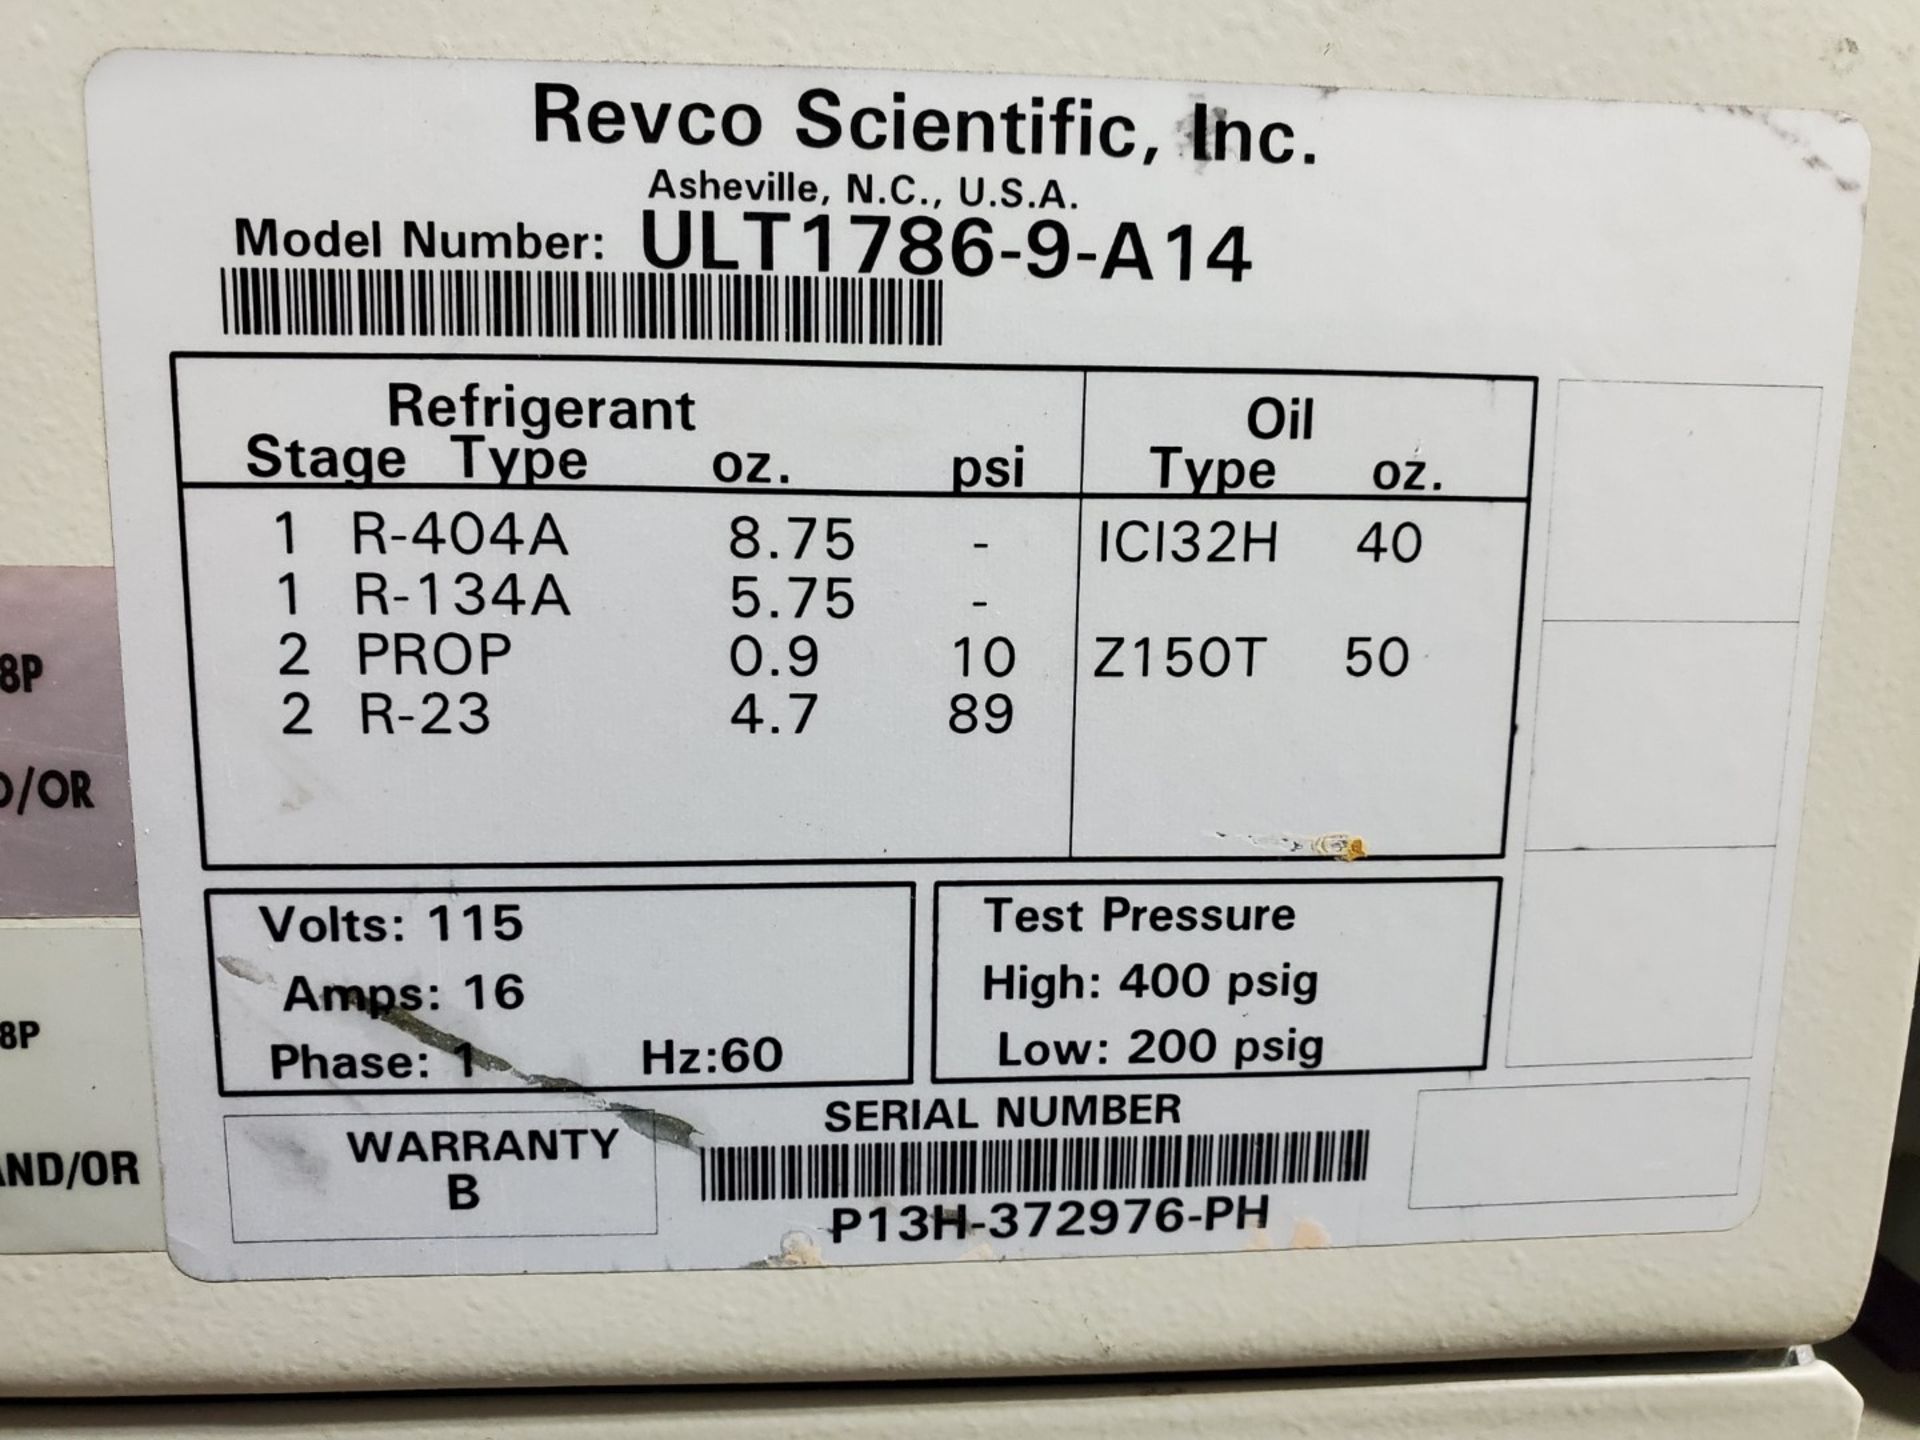 Revco Ultra Low Temperature Freezer, Model ULT1786-9-A14 - Image 2 of 6